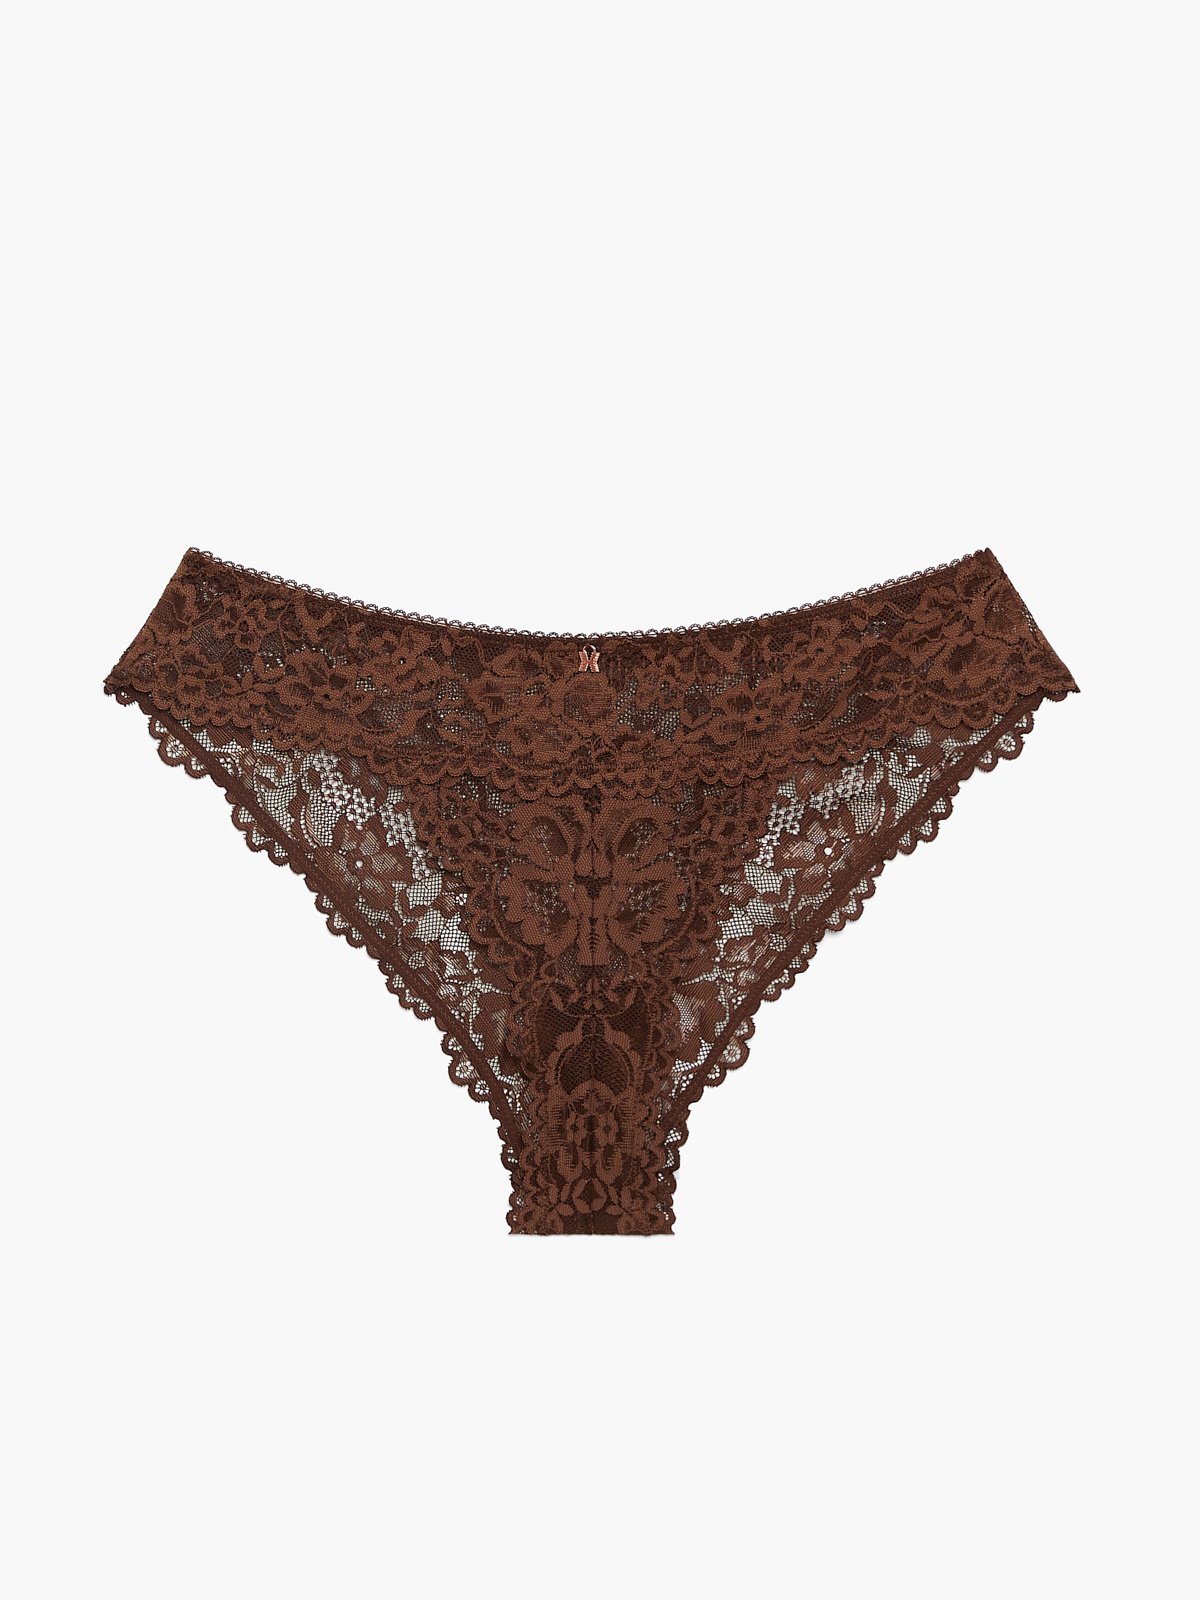 https://cdn.savagex.com/media/images/products/UD2147012-6458/FLORAL-LACE-CHEEKY-PANTY-UD2147012-6458-LAYDOWN-1200x1600.jpg